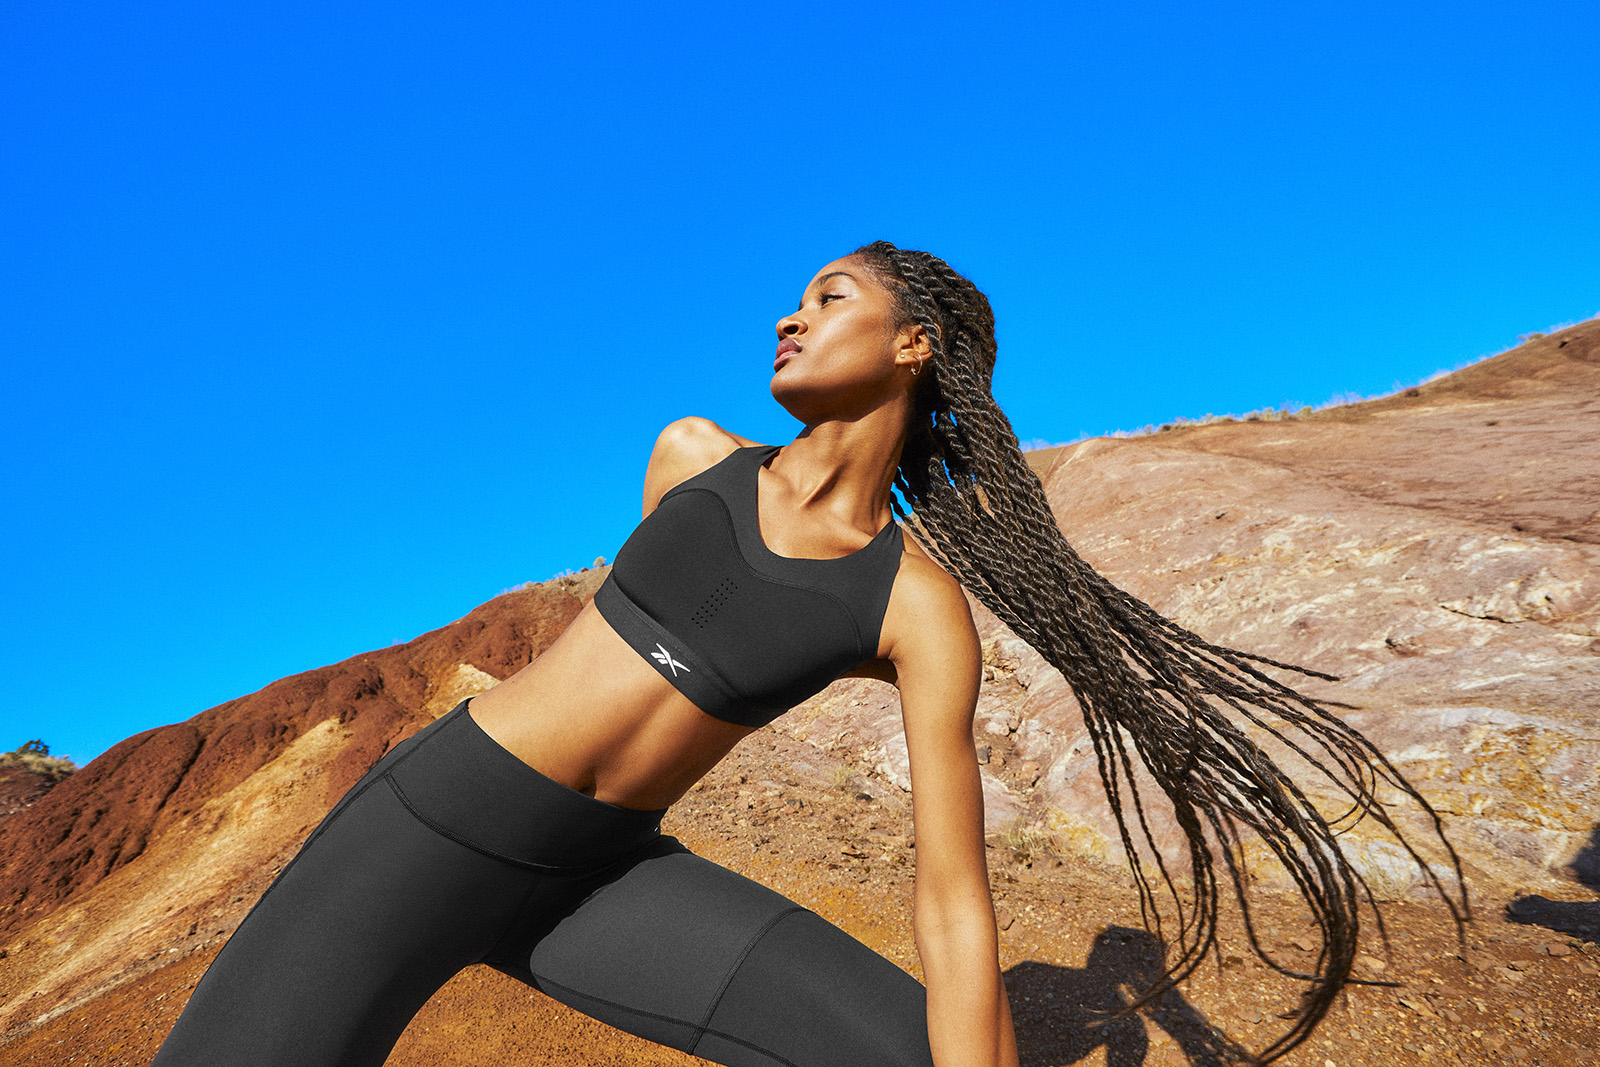 Woman wearing black bra and tights stretches in the same red earth, blue sky location.